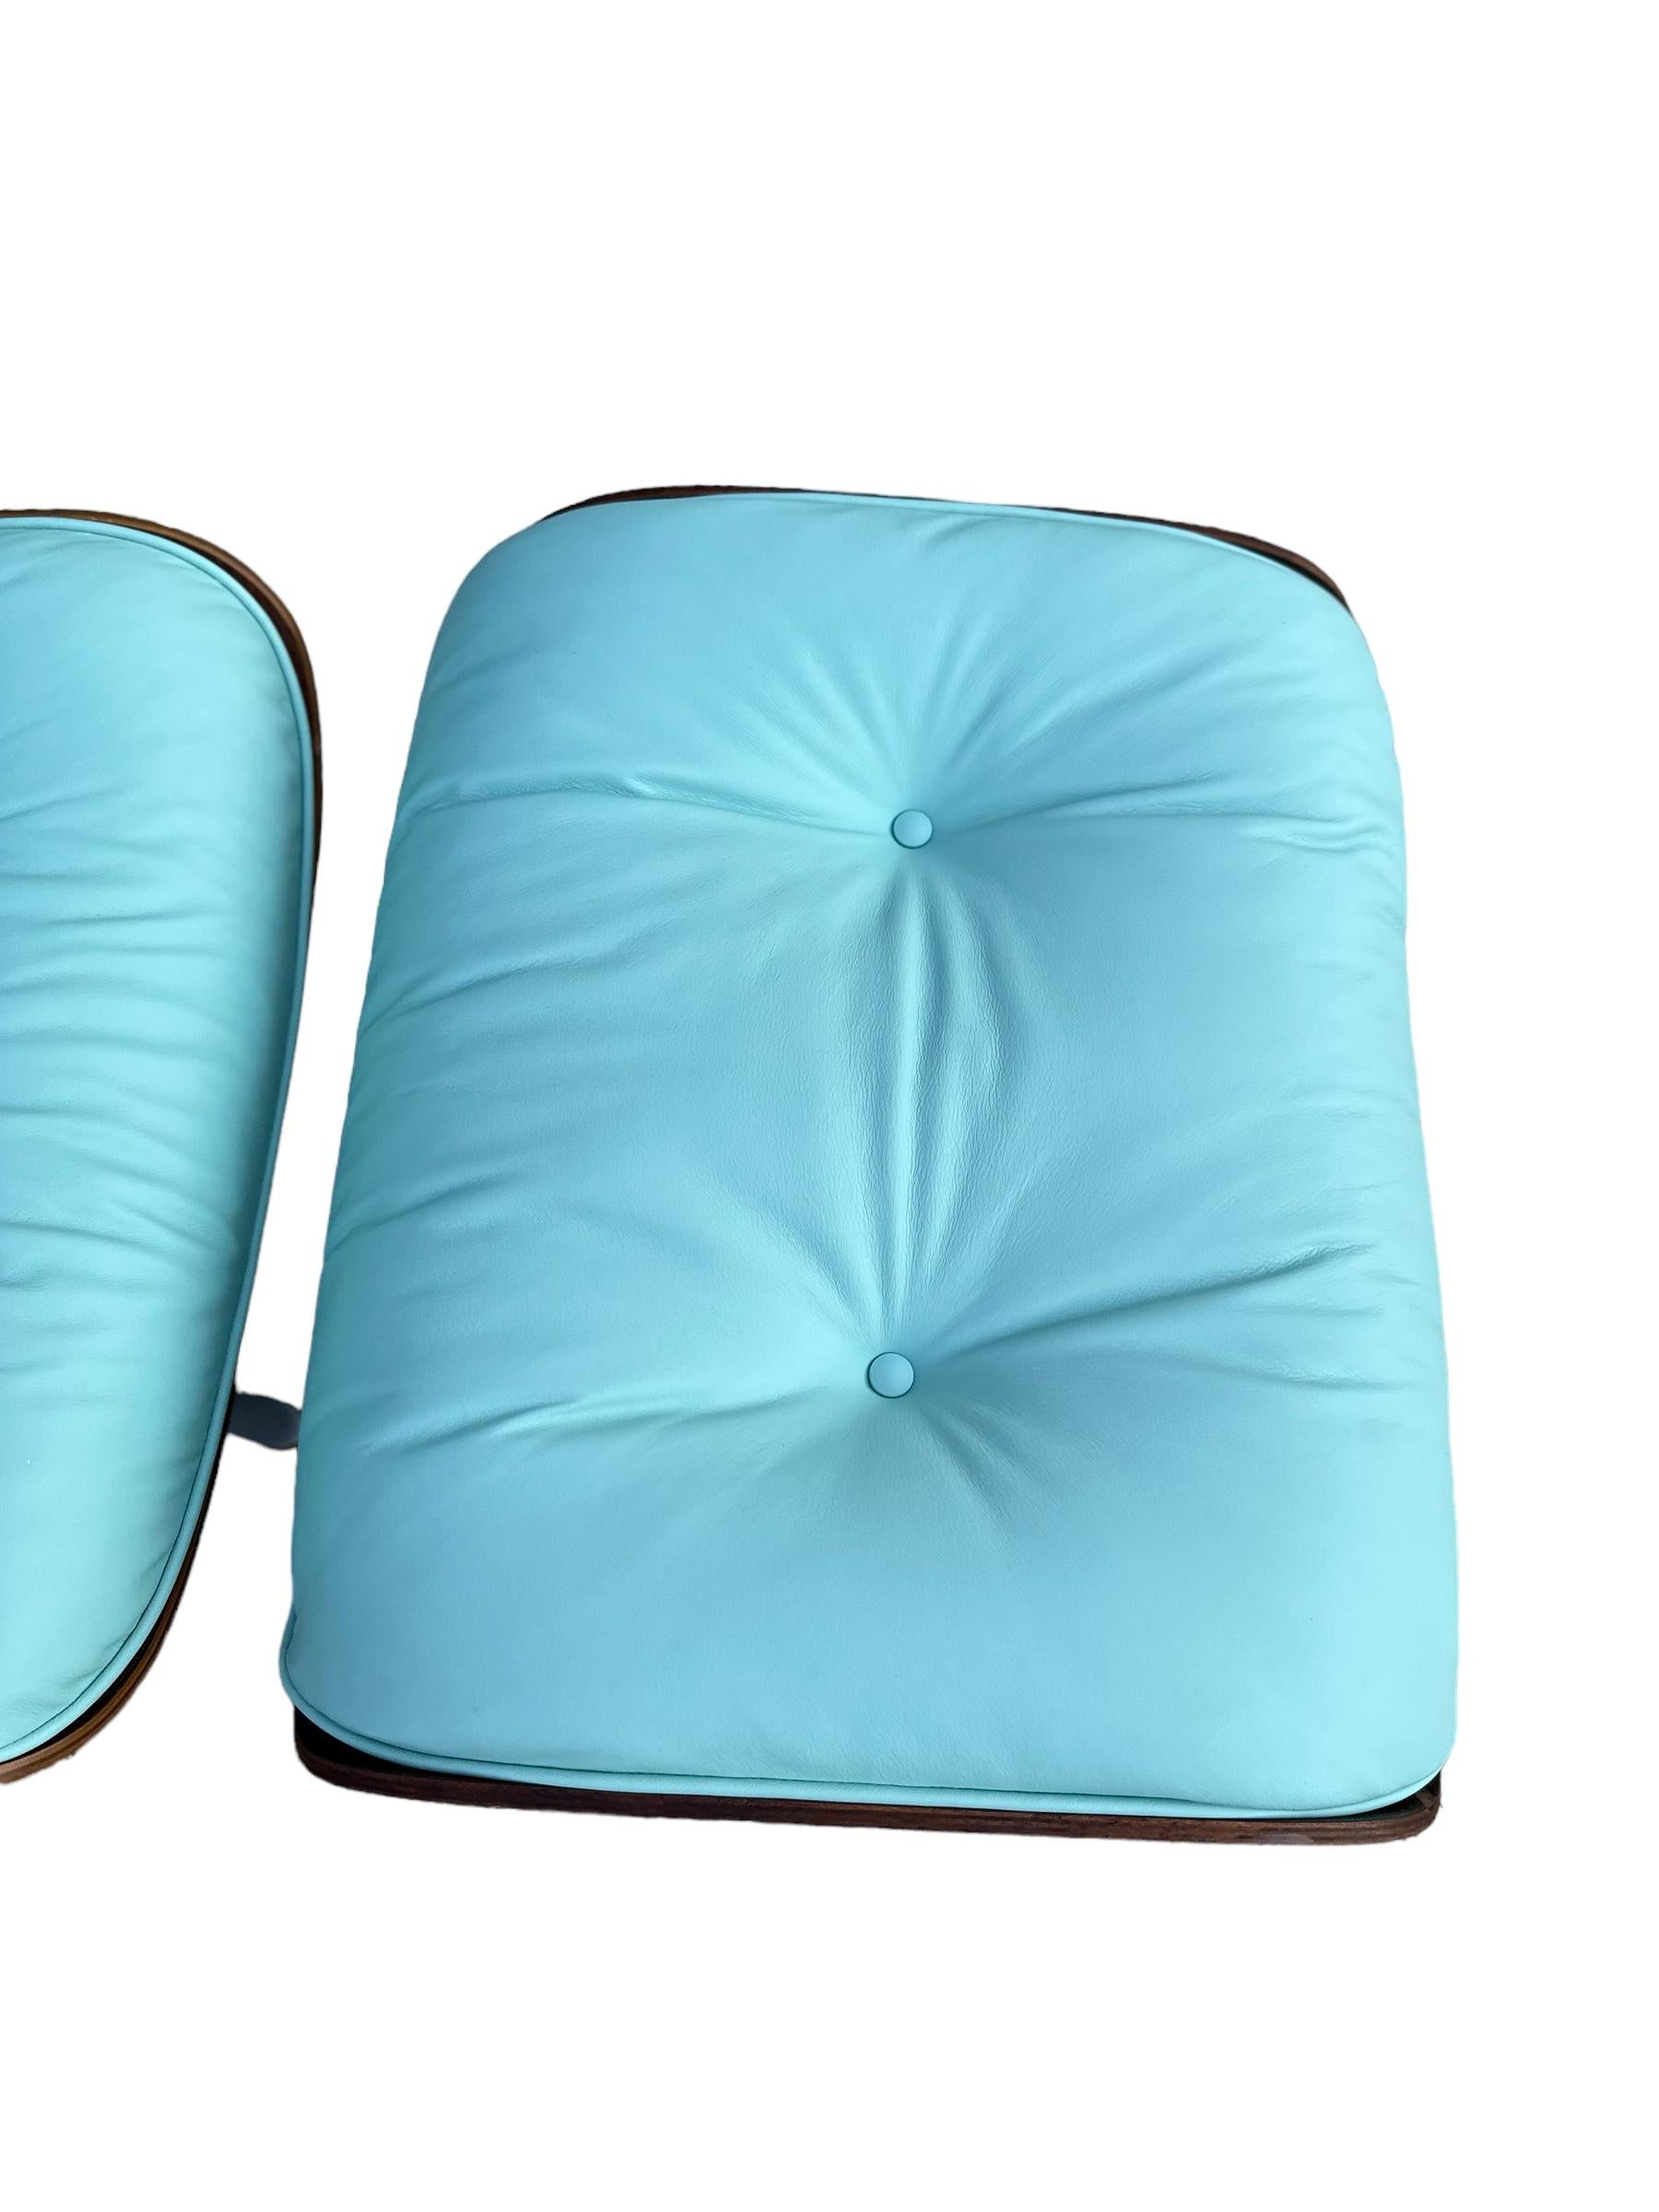 Restored Eames Lounge Chair & Ottoman w/ New Custom Tiffany Blue Leather In Good Condition For Sale In Brooklyn, NY